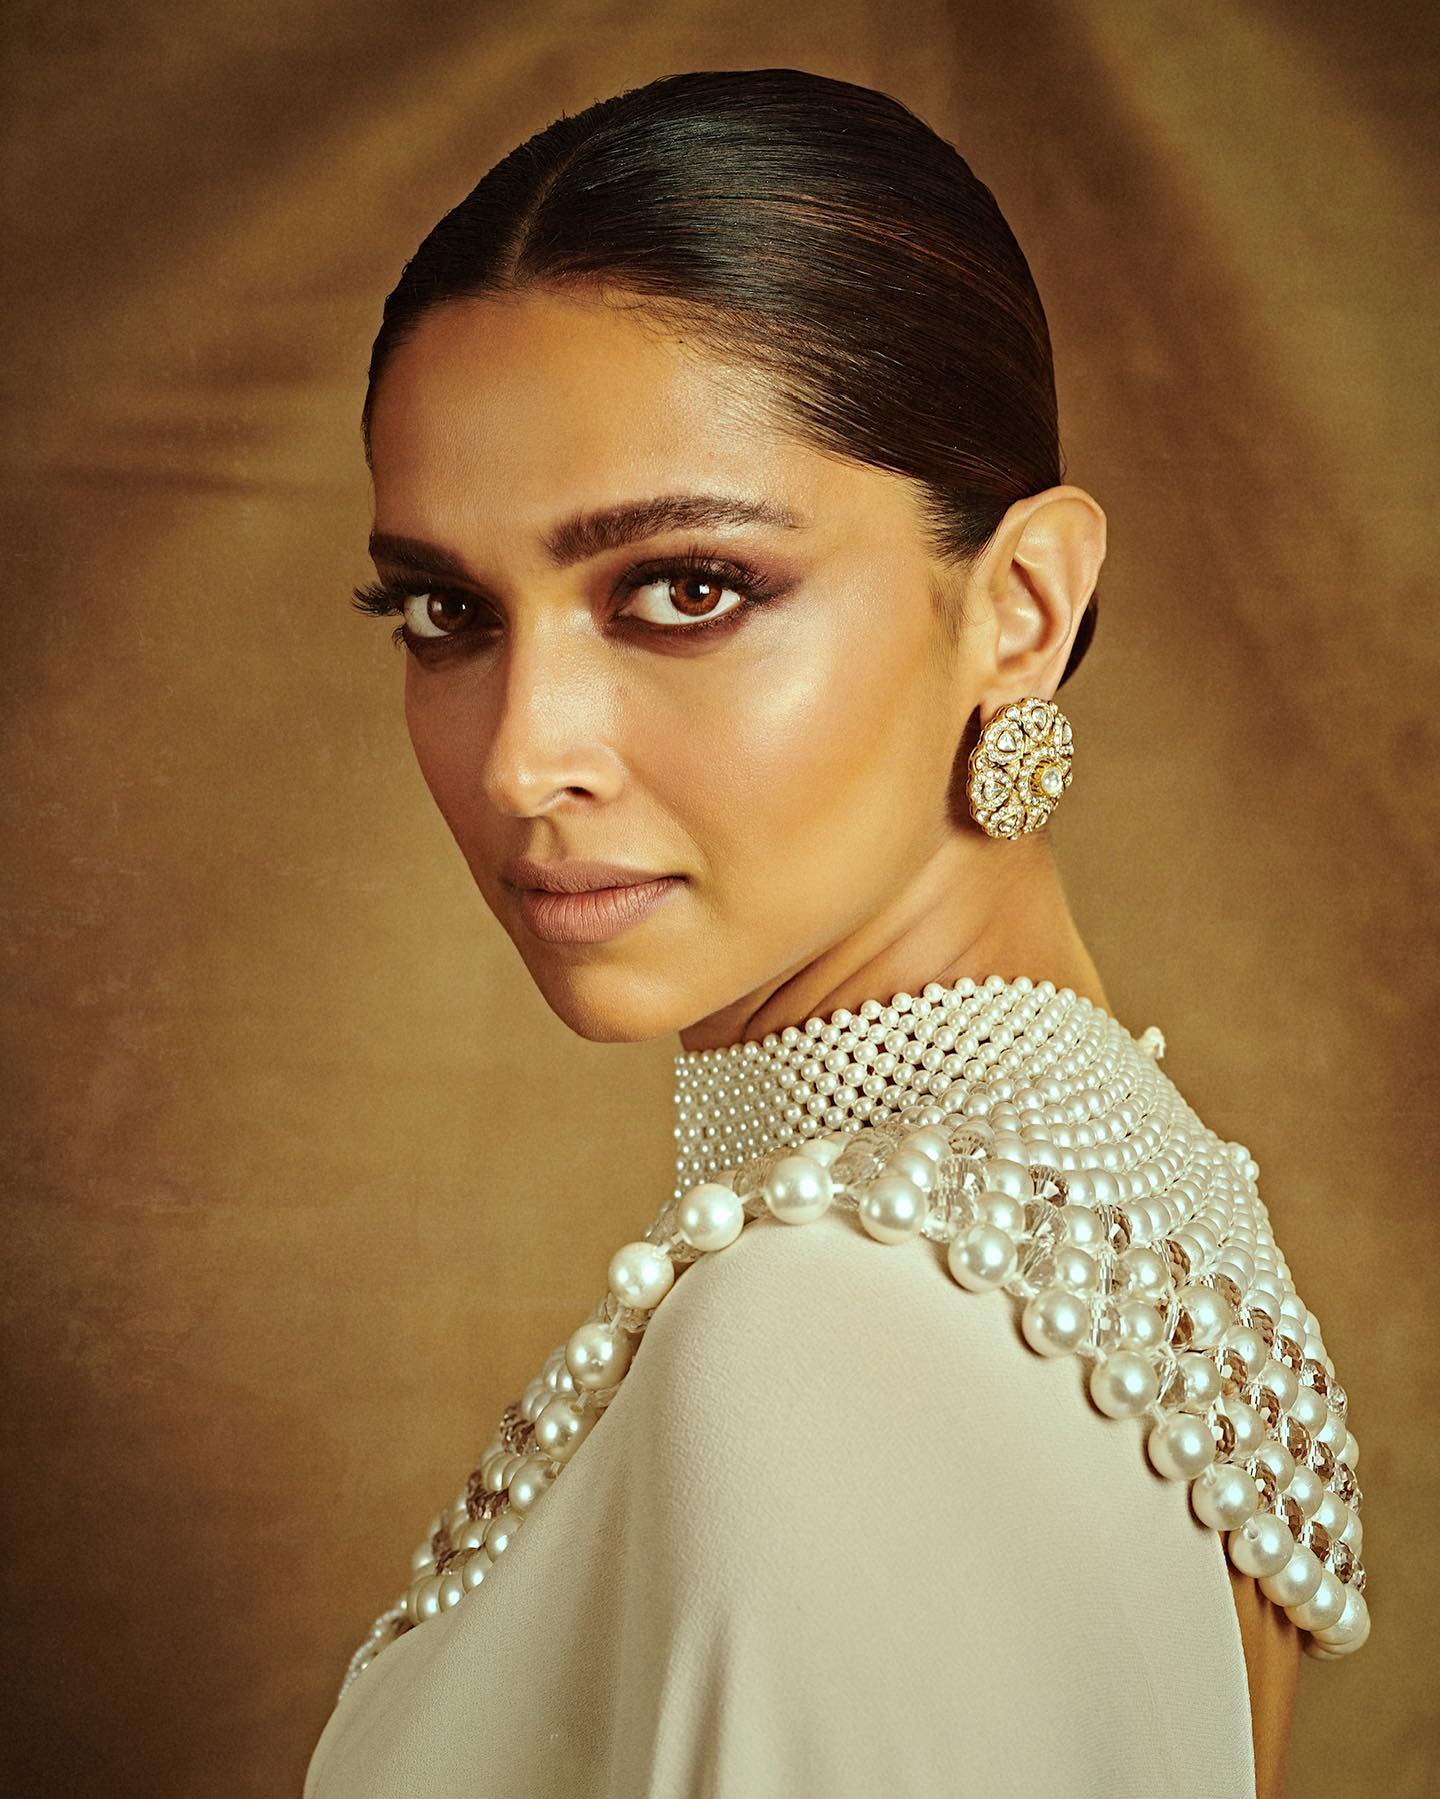 Deepika Padukone seen in Pearl Necklace and Saree at Cannes 2022 Photoshoot